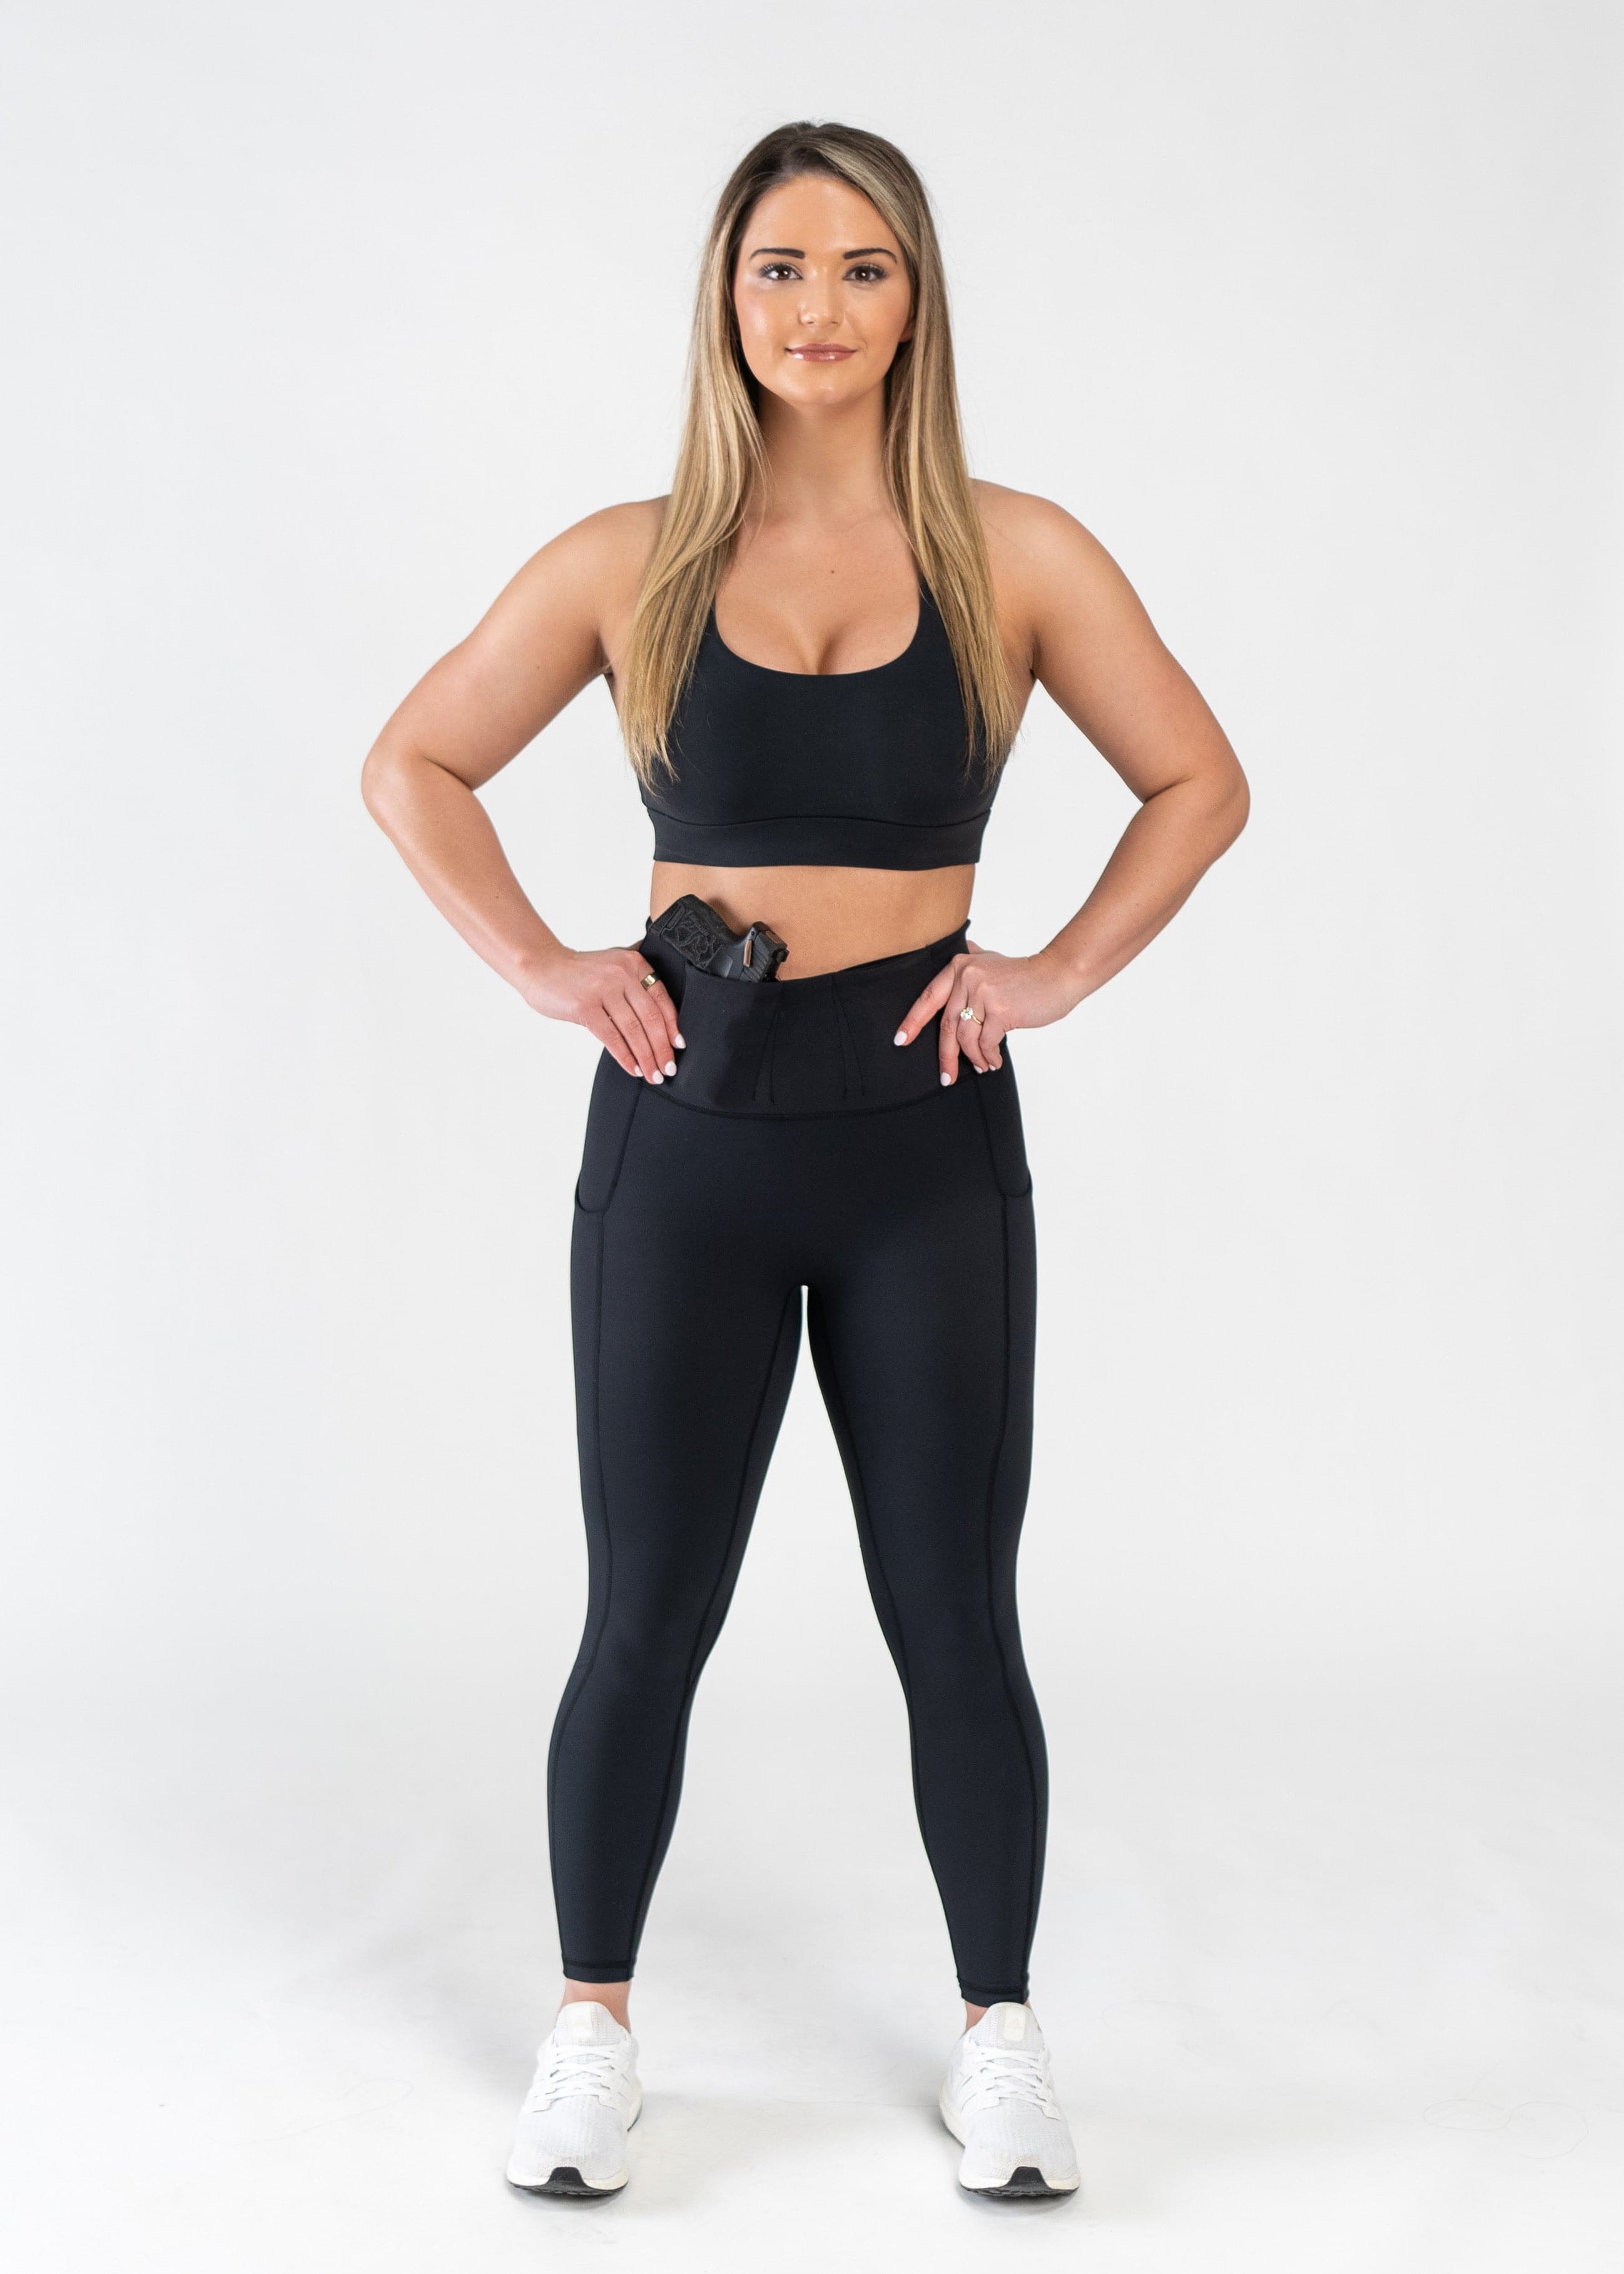 Concealed Carry Leggings With Pockets Full Body View with Hands on Hips | Black